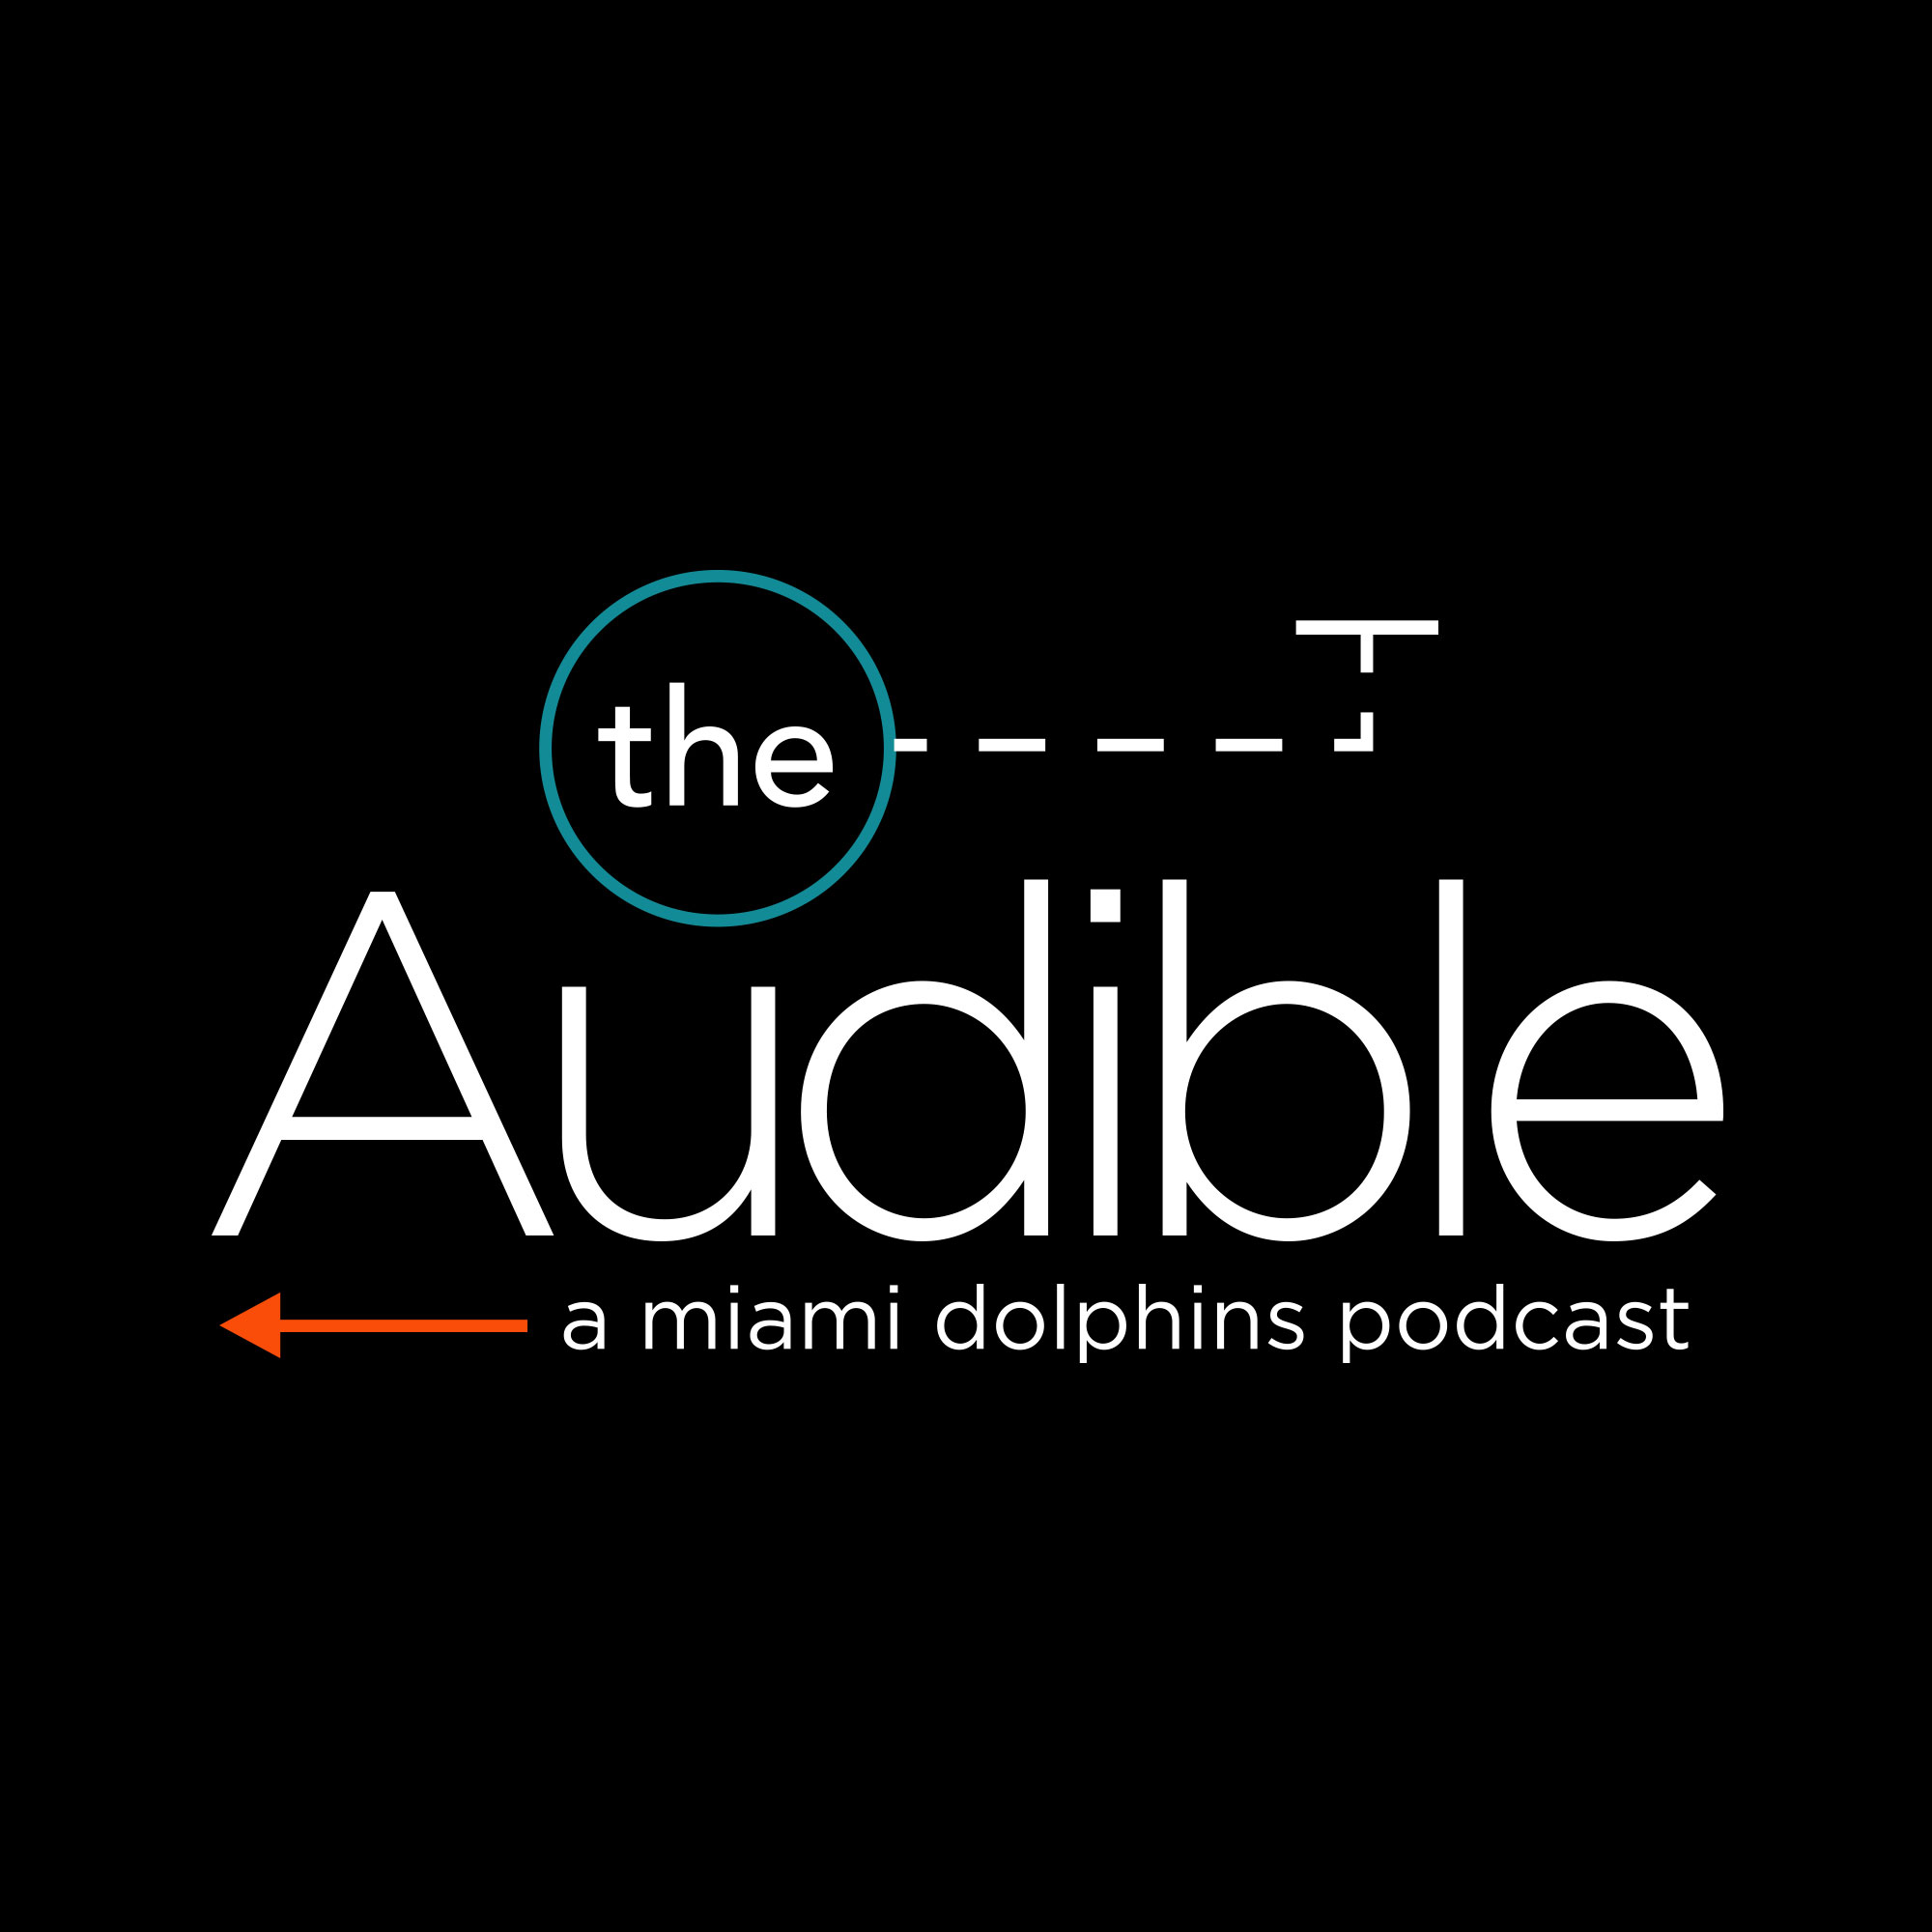 Post Draft Special With Travis Wingfield | The Audible Episode 154